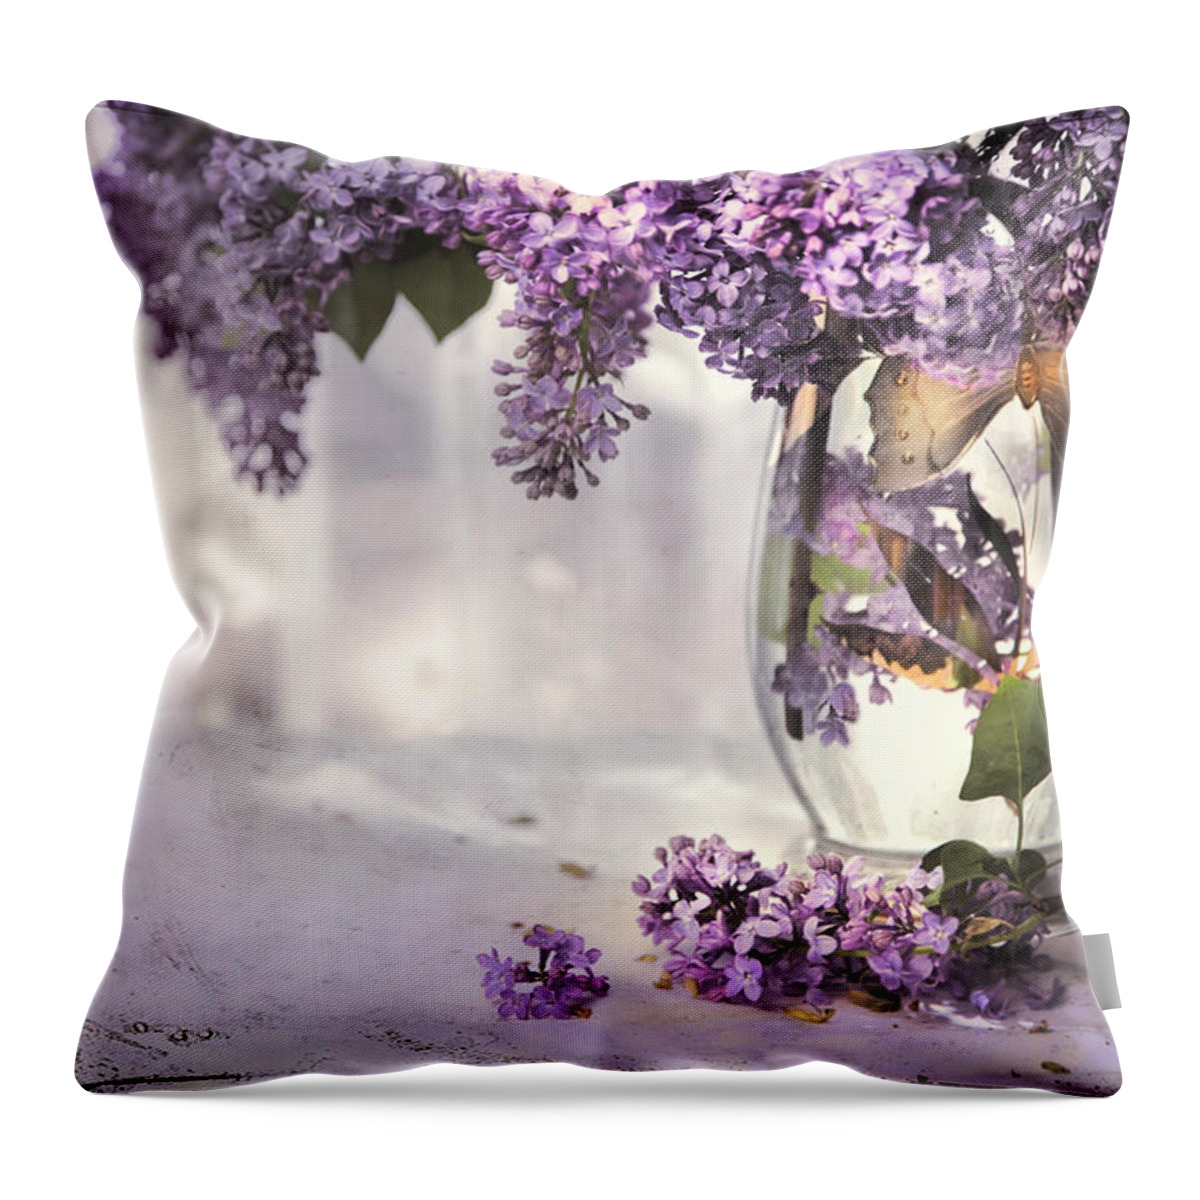 Lilacs Throw Pillow featuring the photograph I Picked A Bouquet Of Lilacs Today by Theresa Tahara